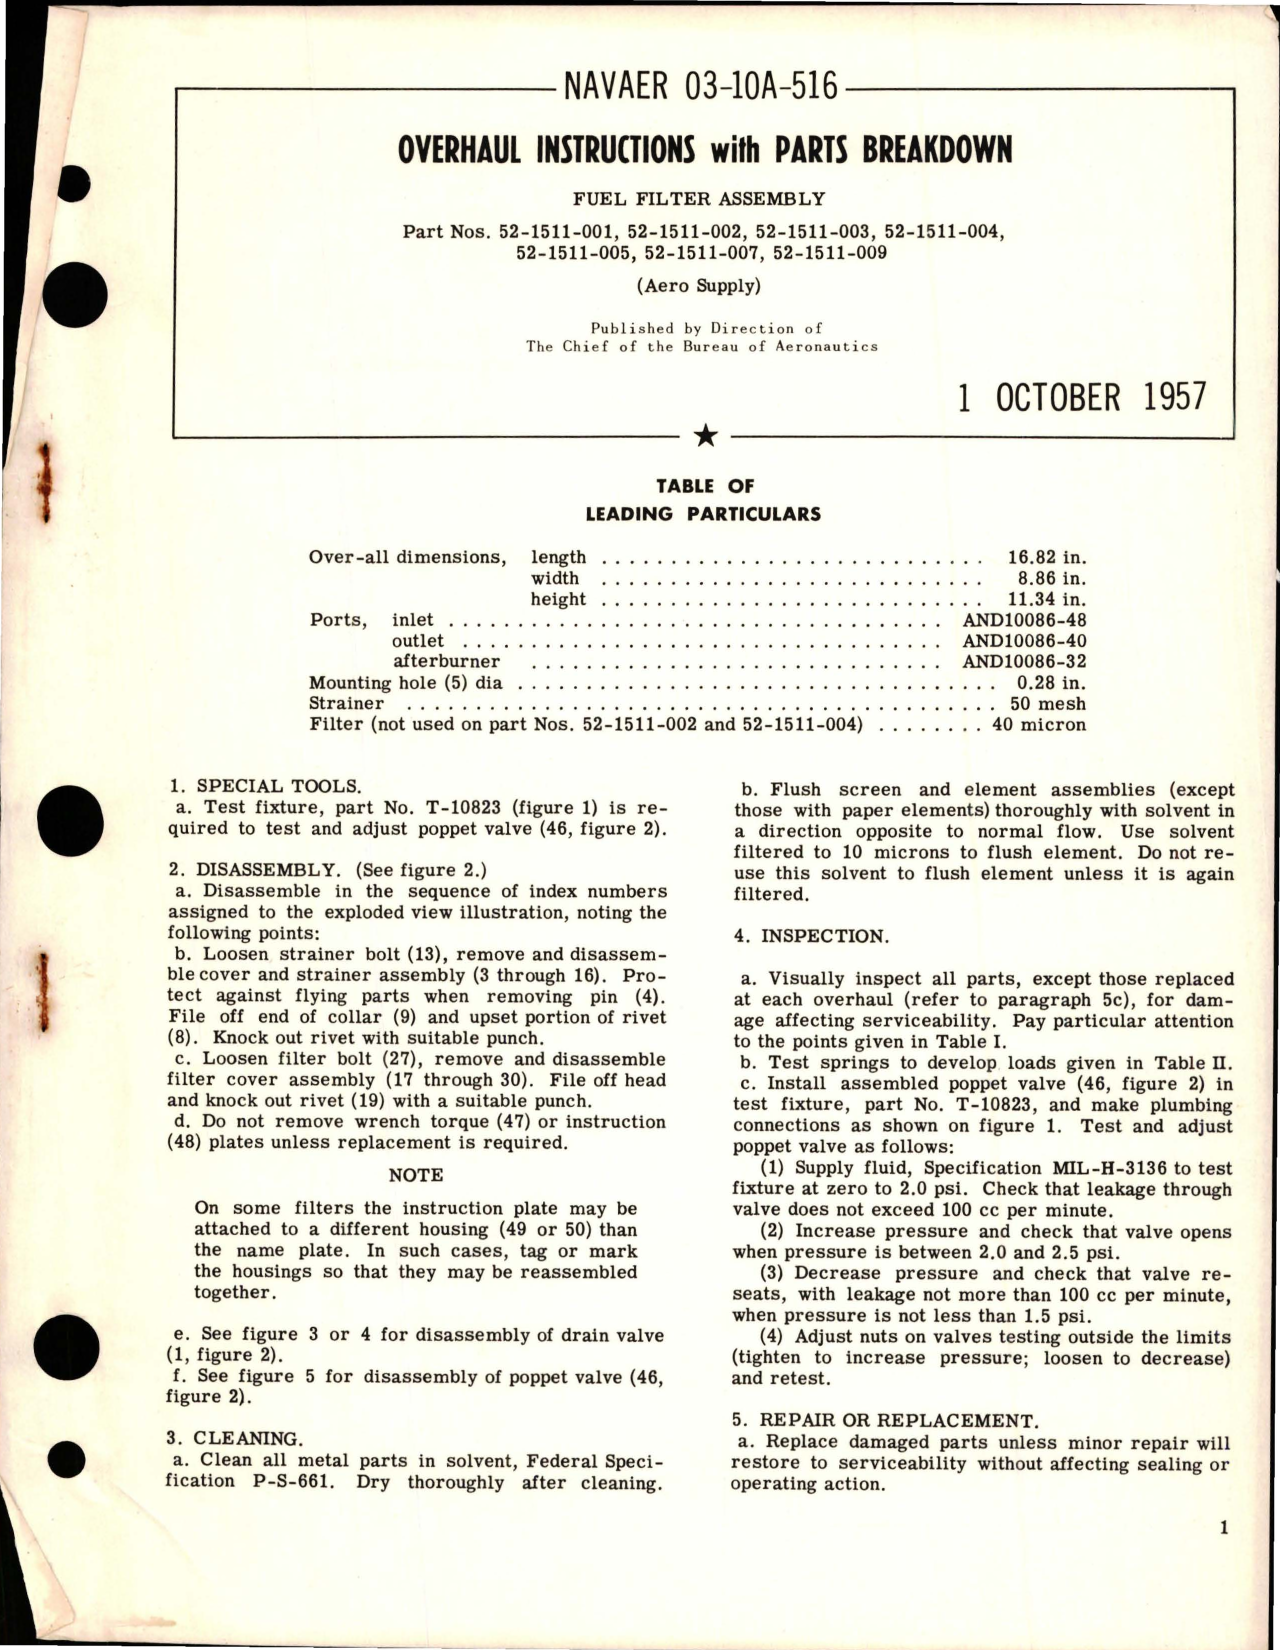 Sample page 1 from AirCorps Library document: Overhaul Instructions with Parts Breakdown for Fuel Filter Assembly